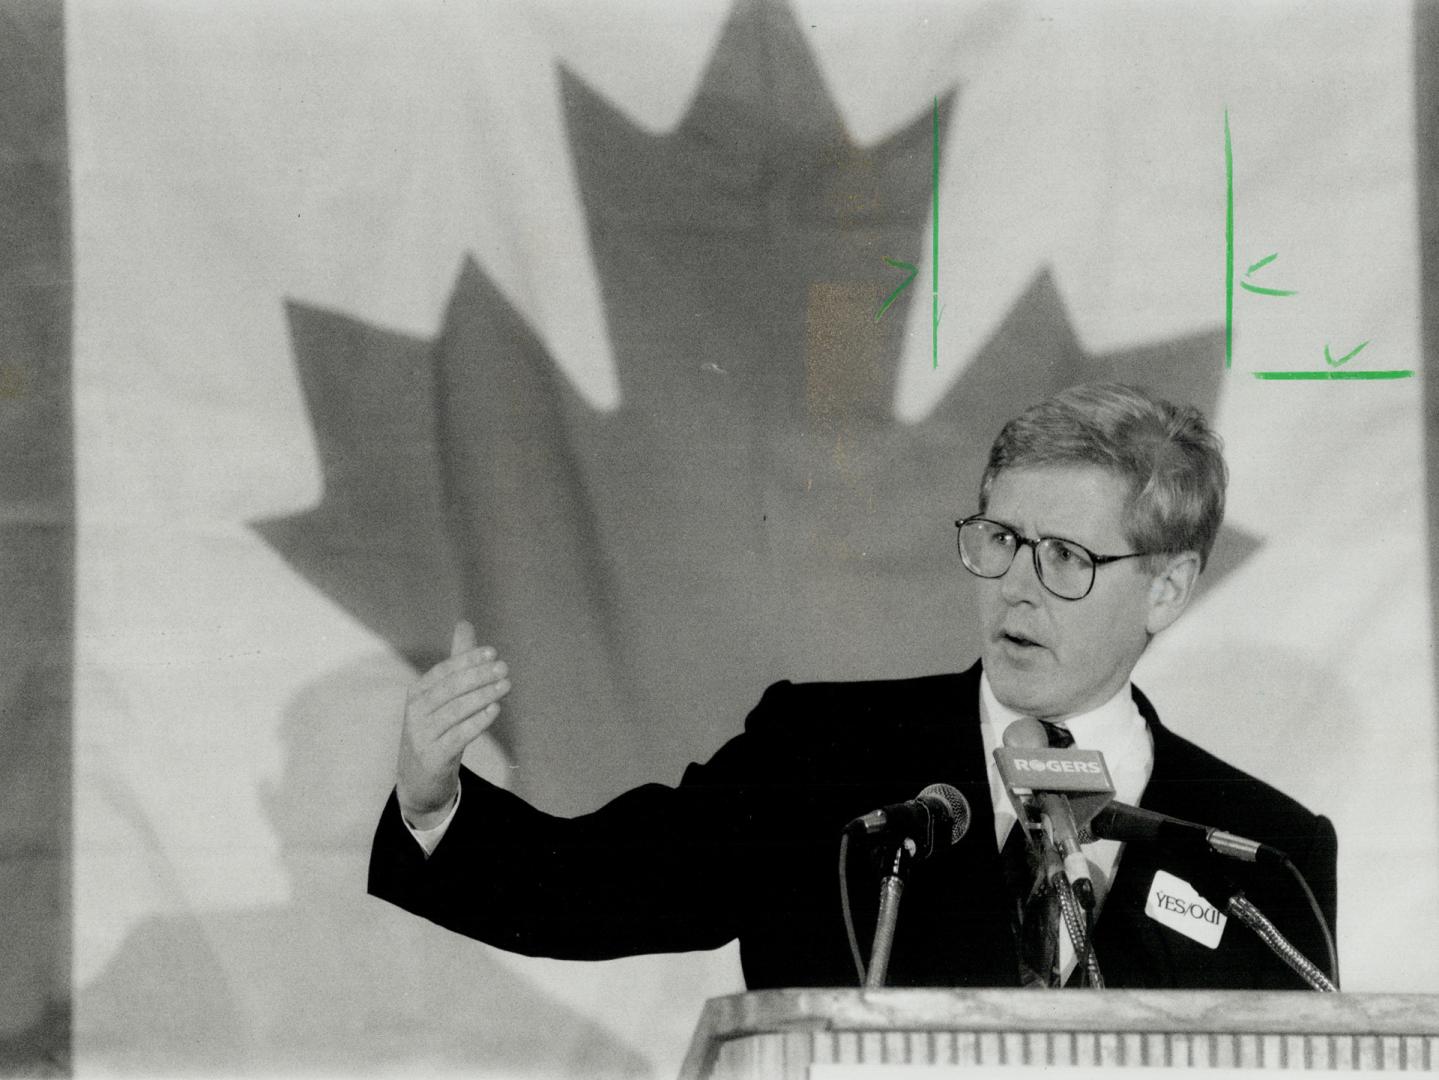 Bob Rae, Premier's speech was his toughest attack yet on No side